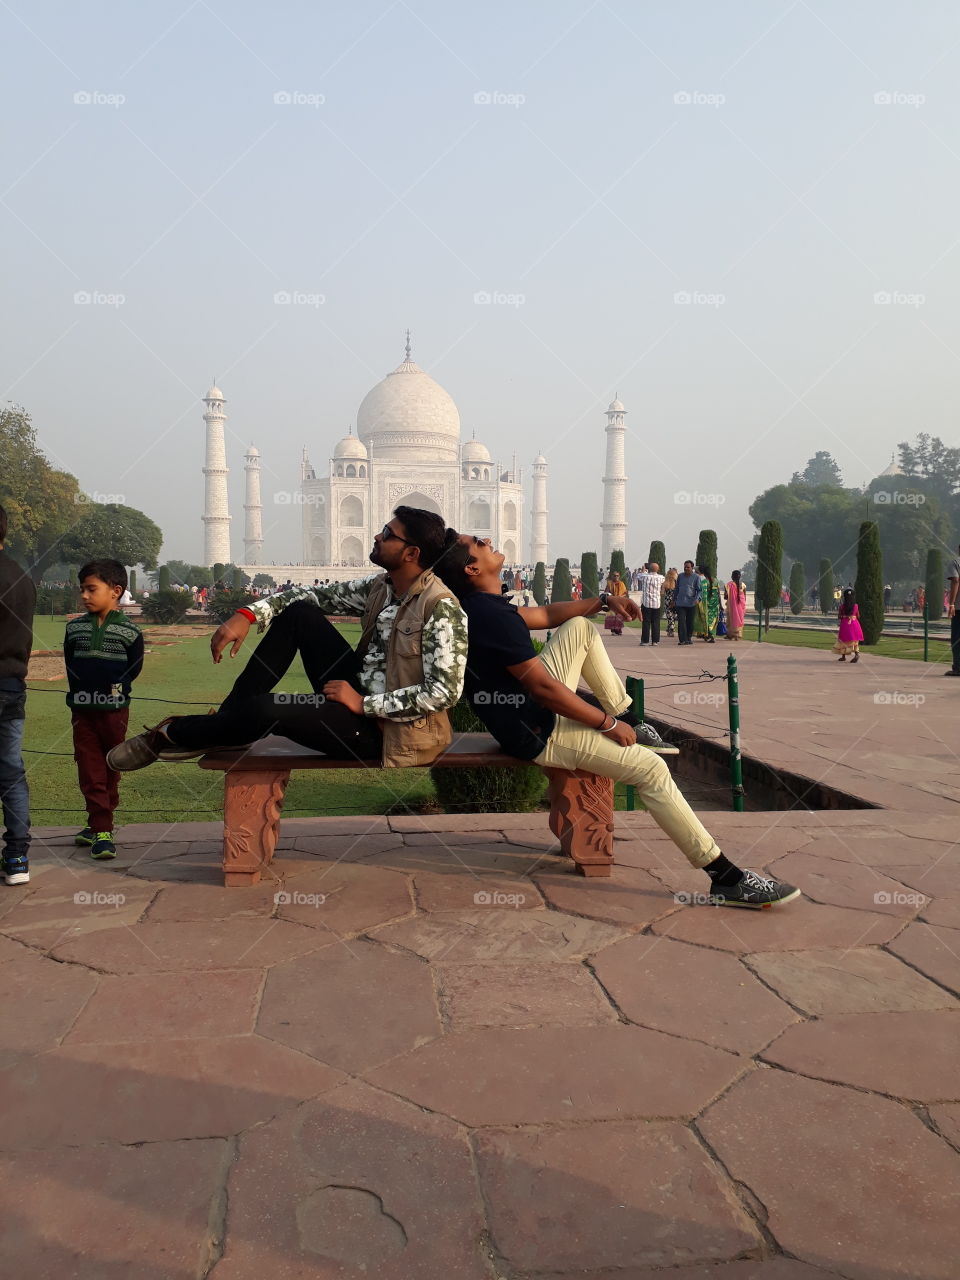 taj Mahal ....dreams of every lover,every girls want that a partner do like that for #me #aswife #lover #girlfriend